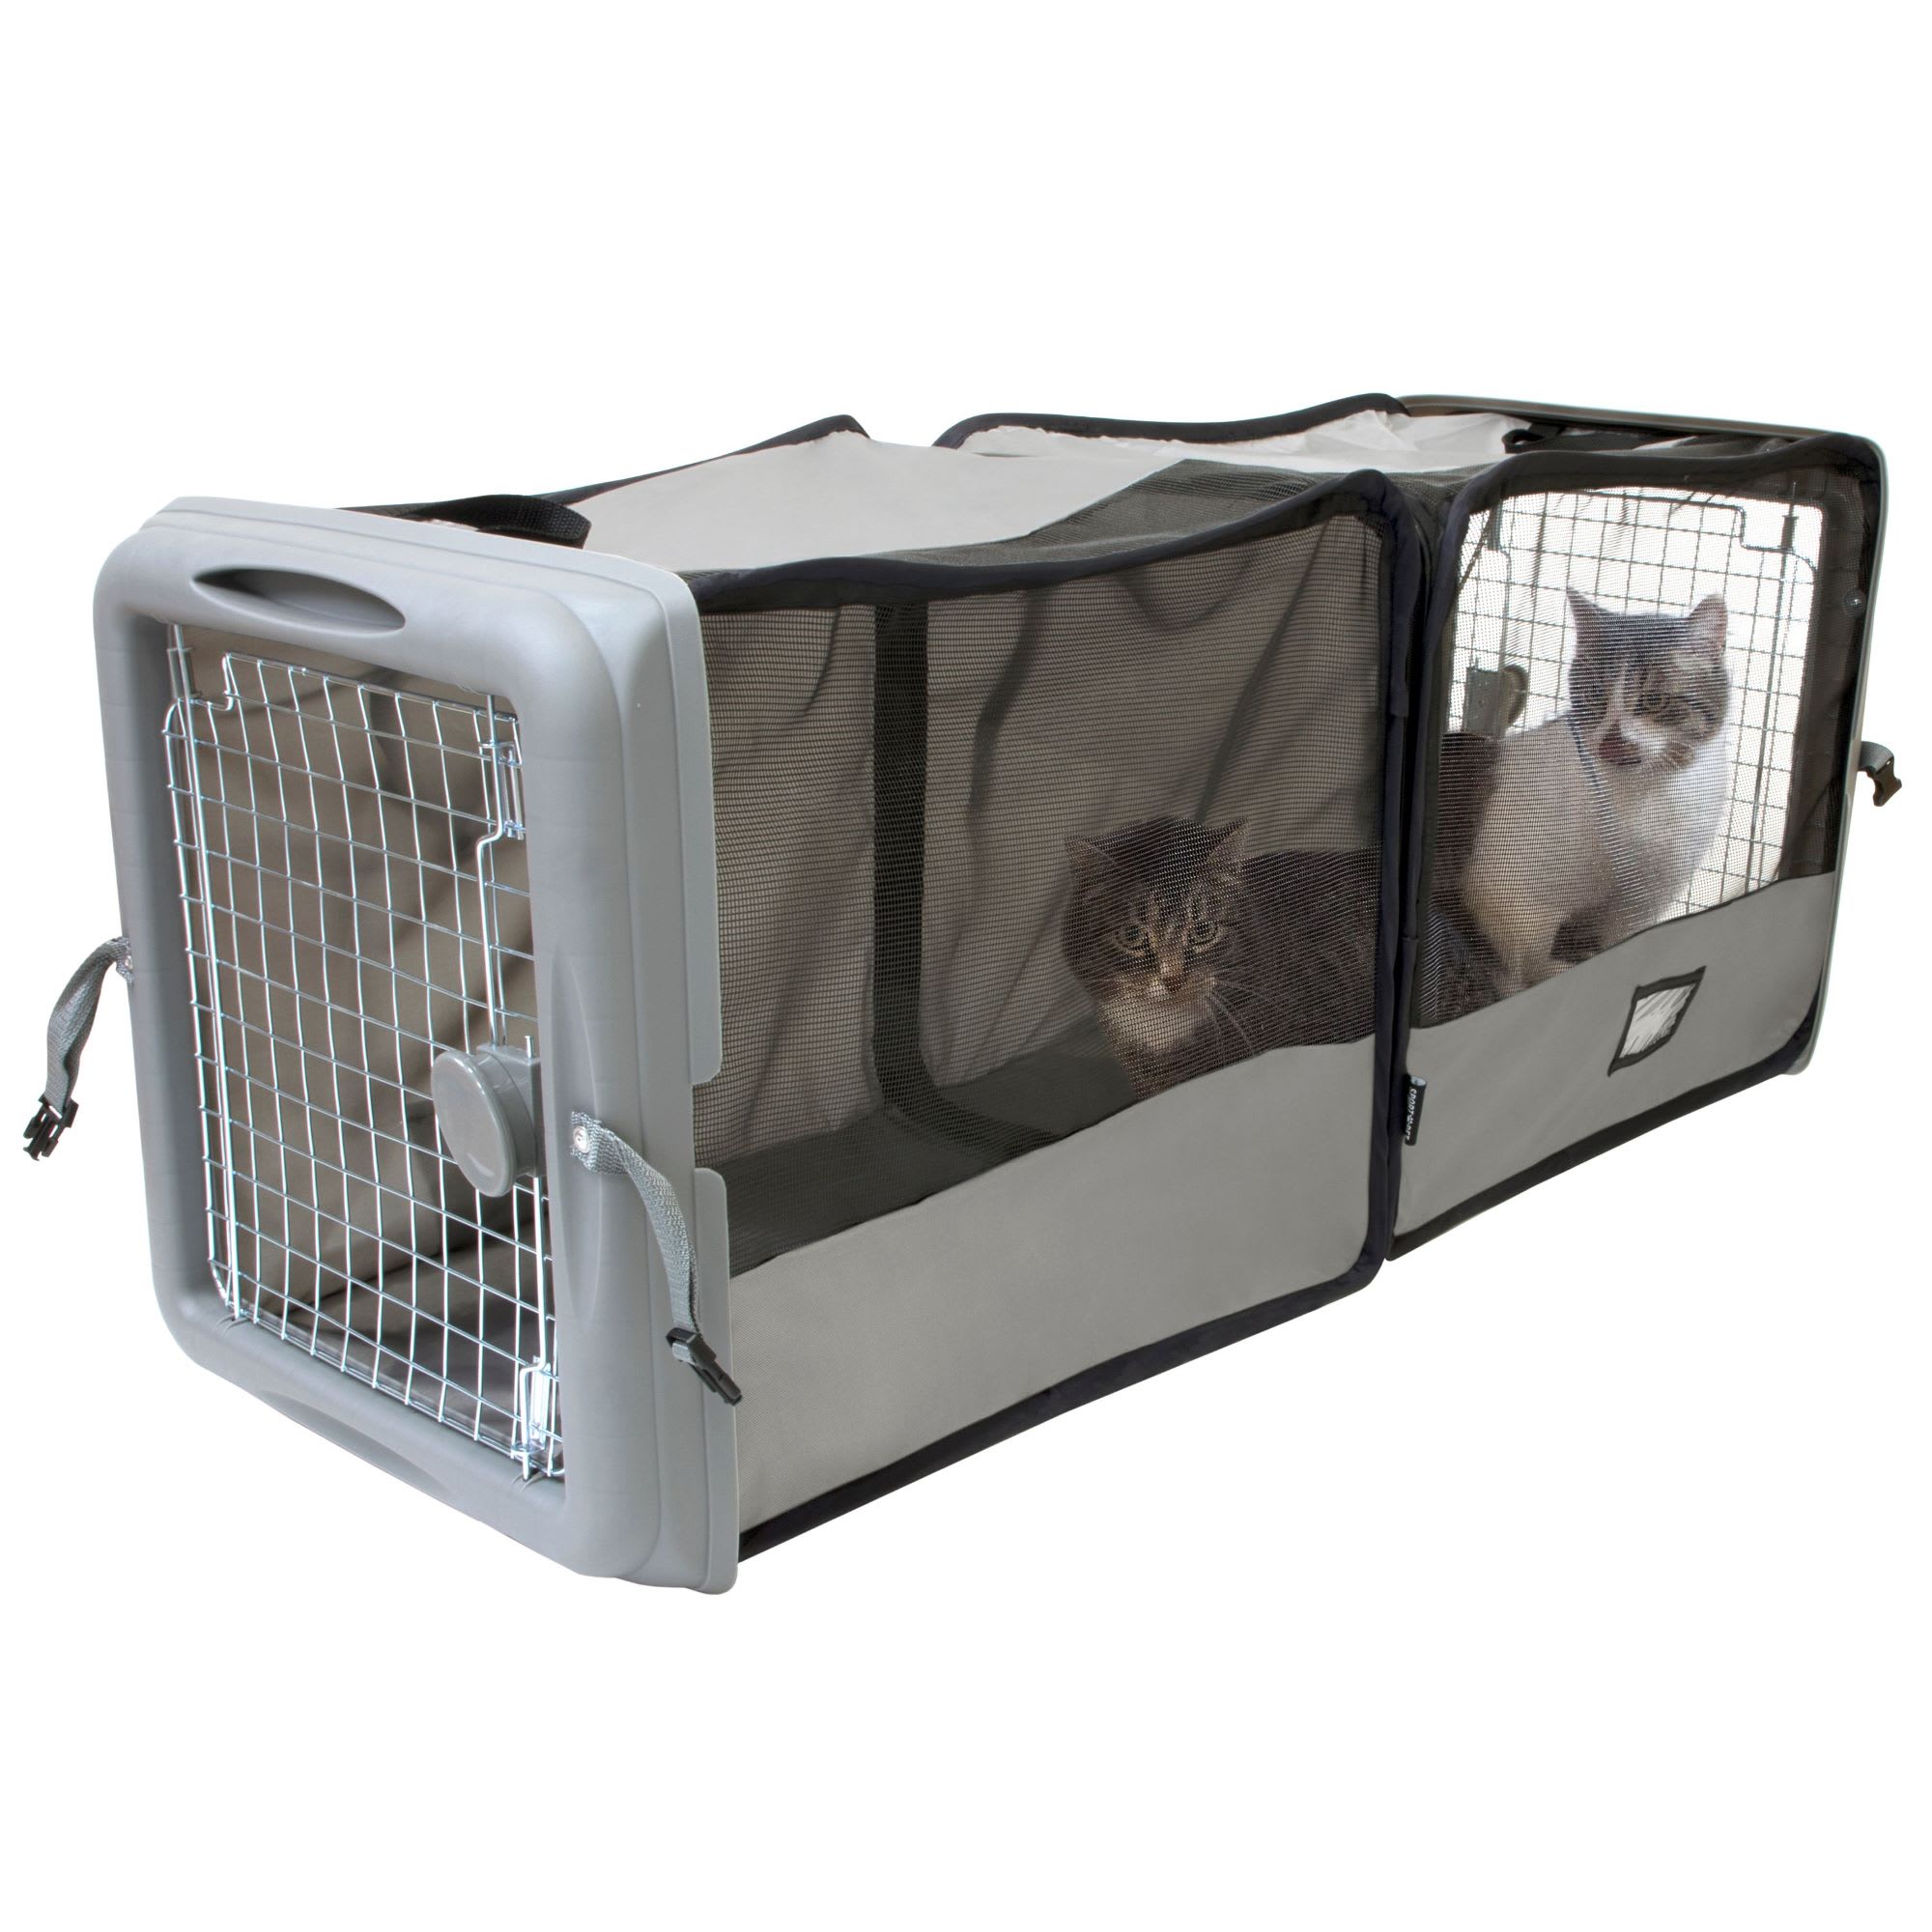 Kitty City Car Seat Pet Crate for Cats | Petco